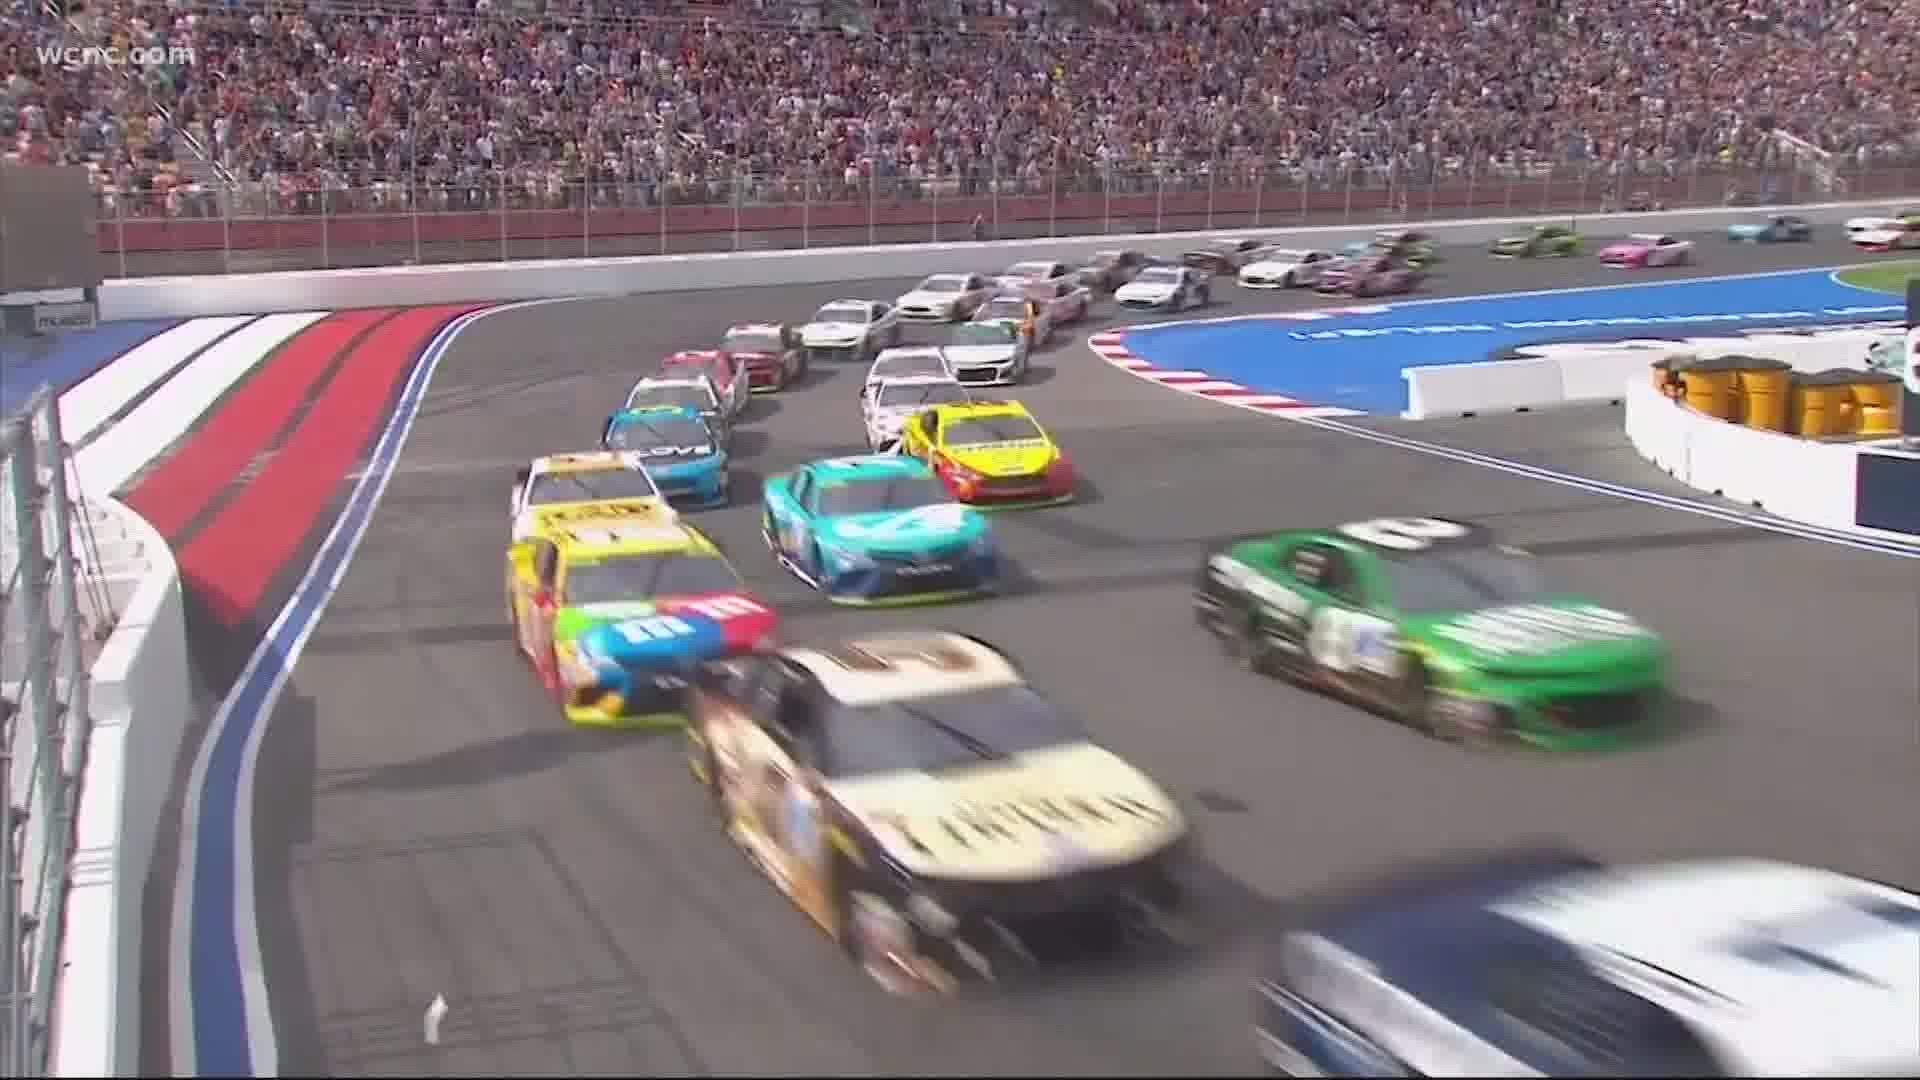 The race is set to start Sunday at 3 p.m. on NBC